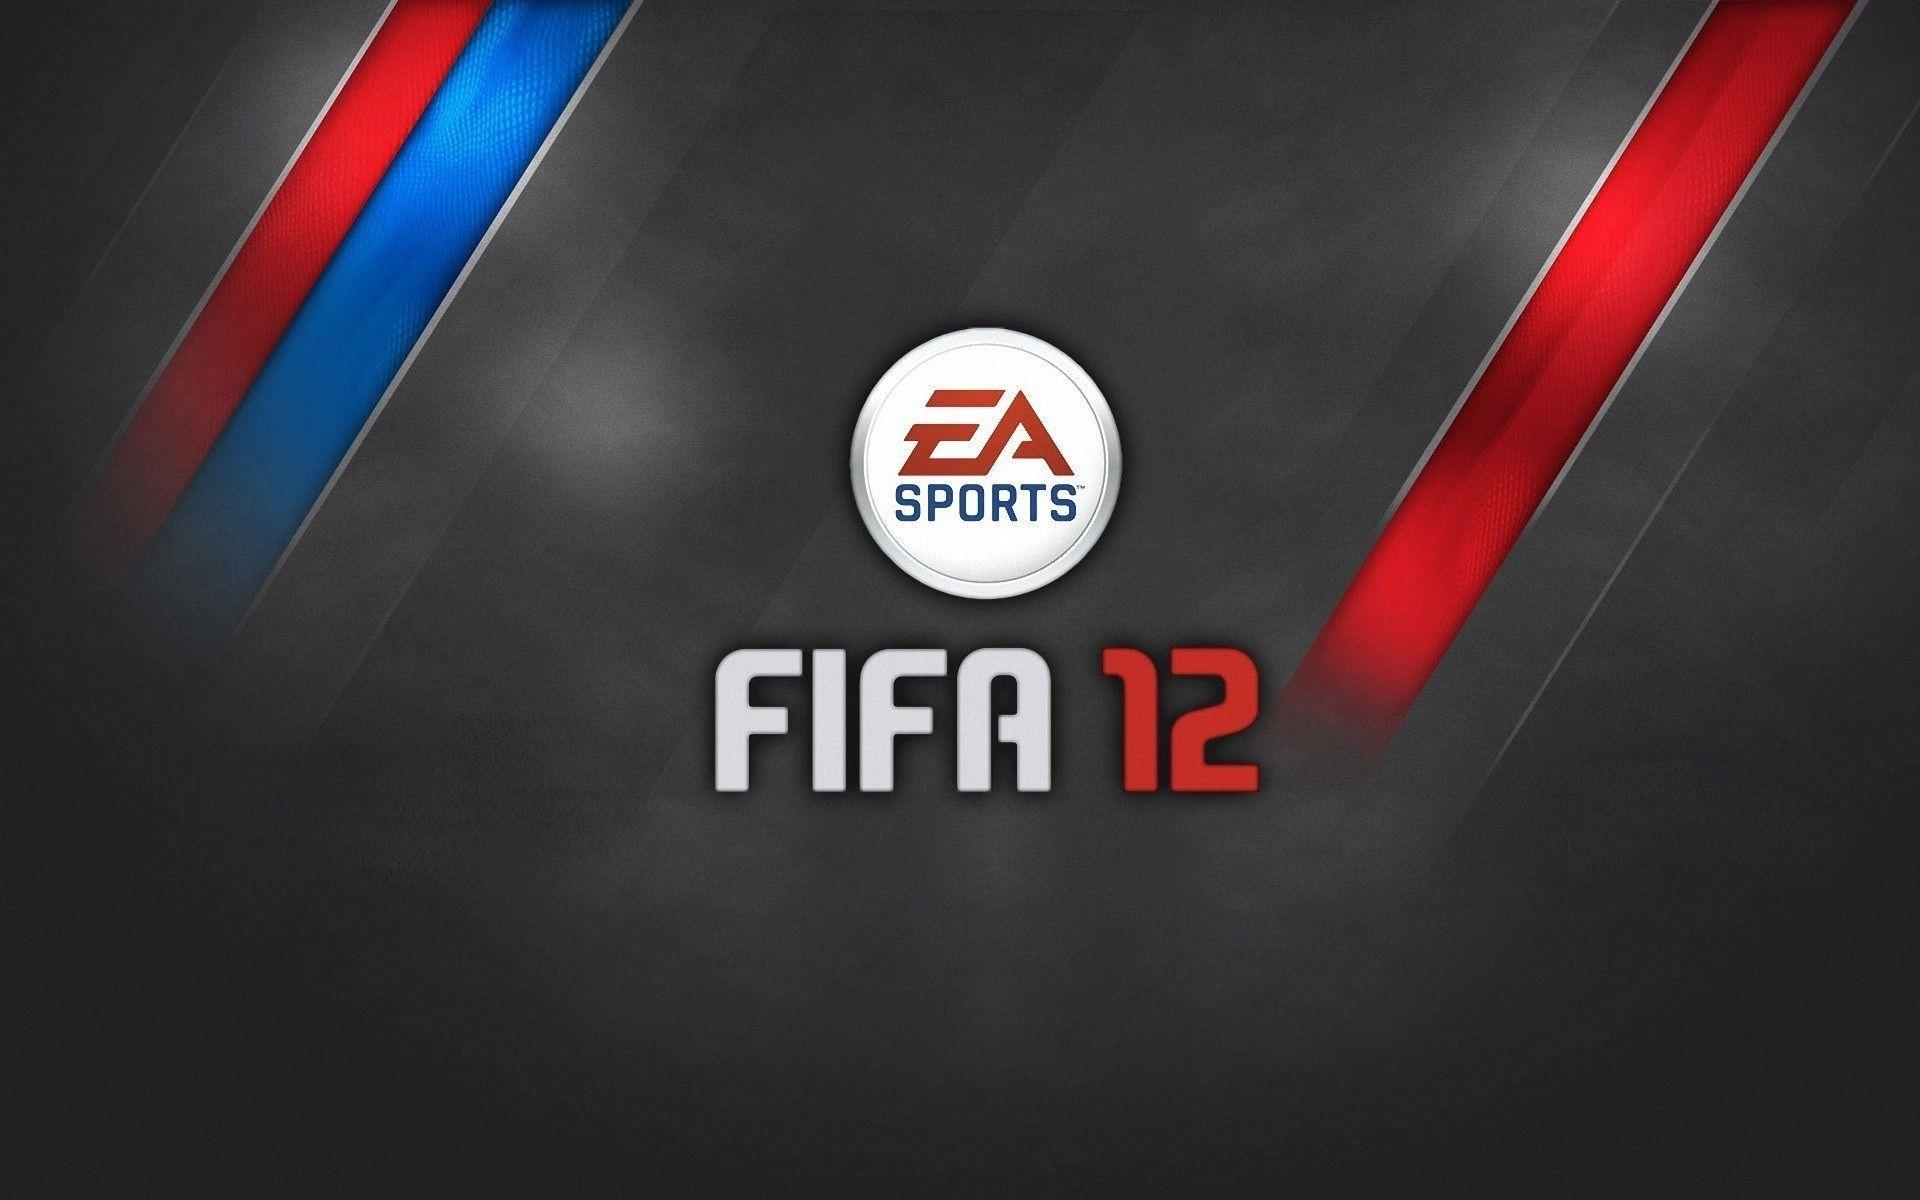 Download Wallpaper 1920x1200 FIFA 12 EA Sports Game HD Background